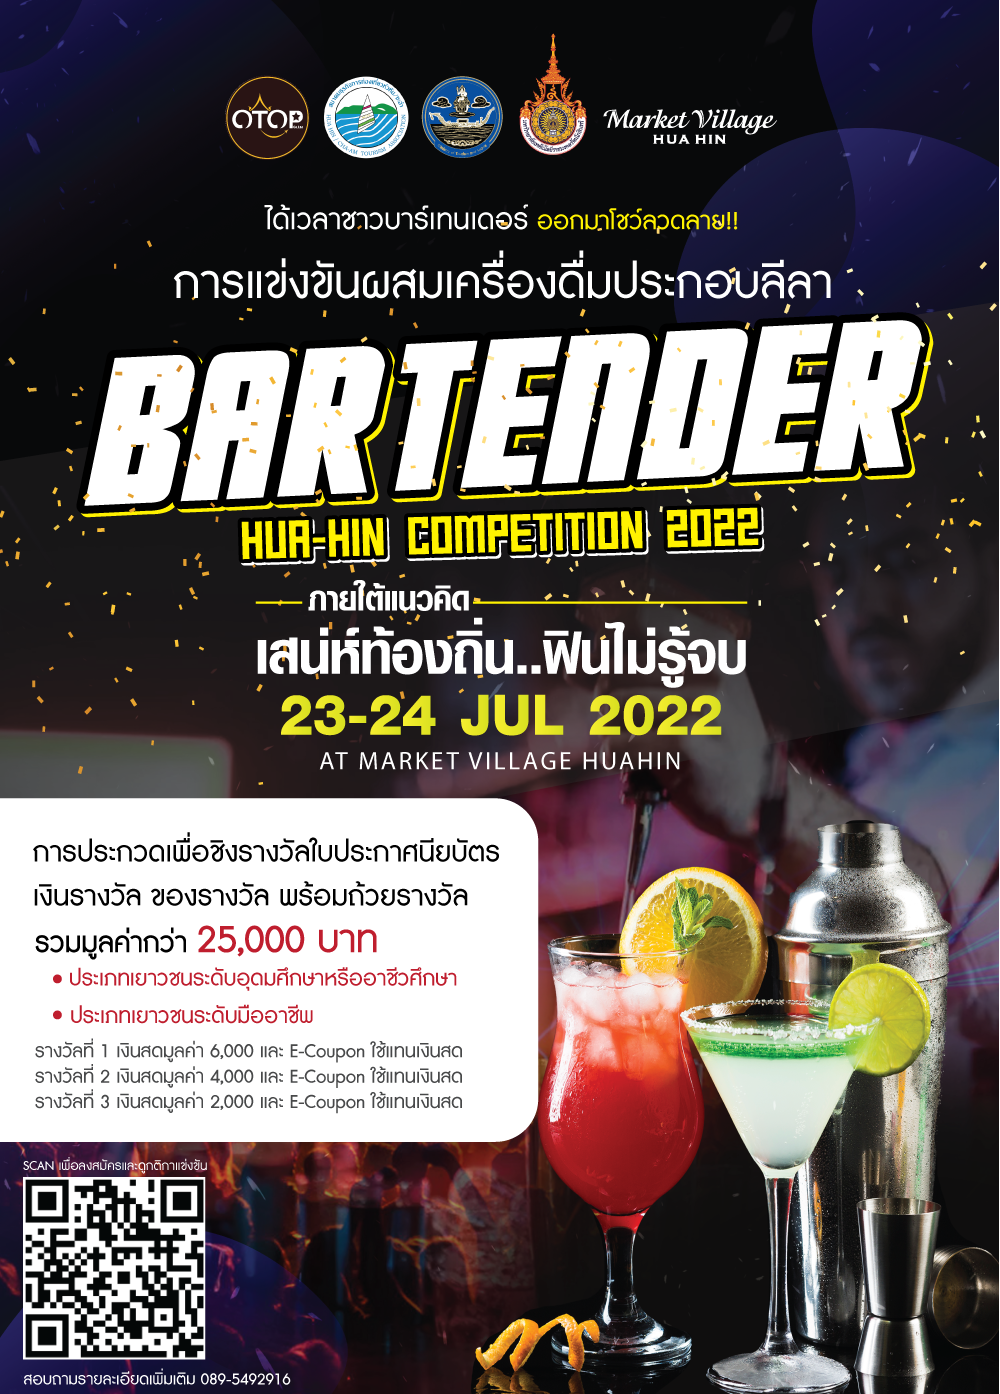 Bartender HuaHin Competition 2022